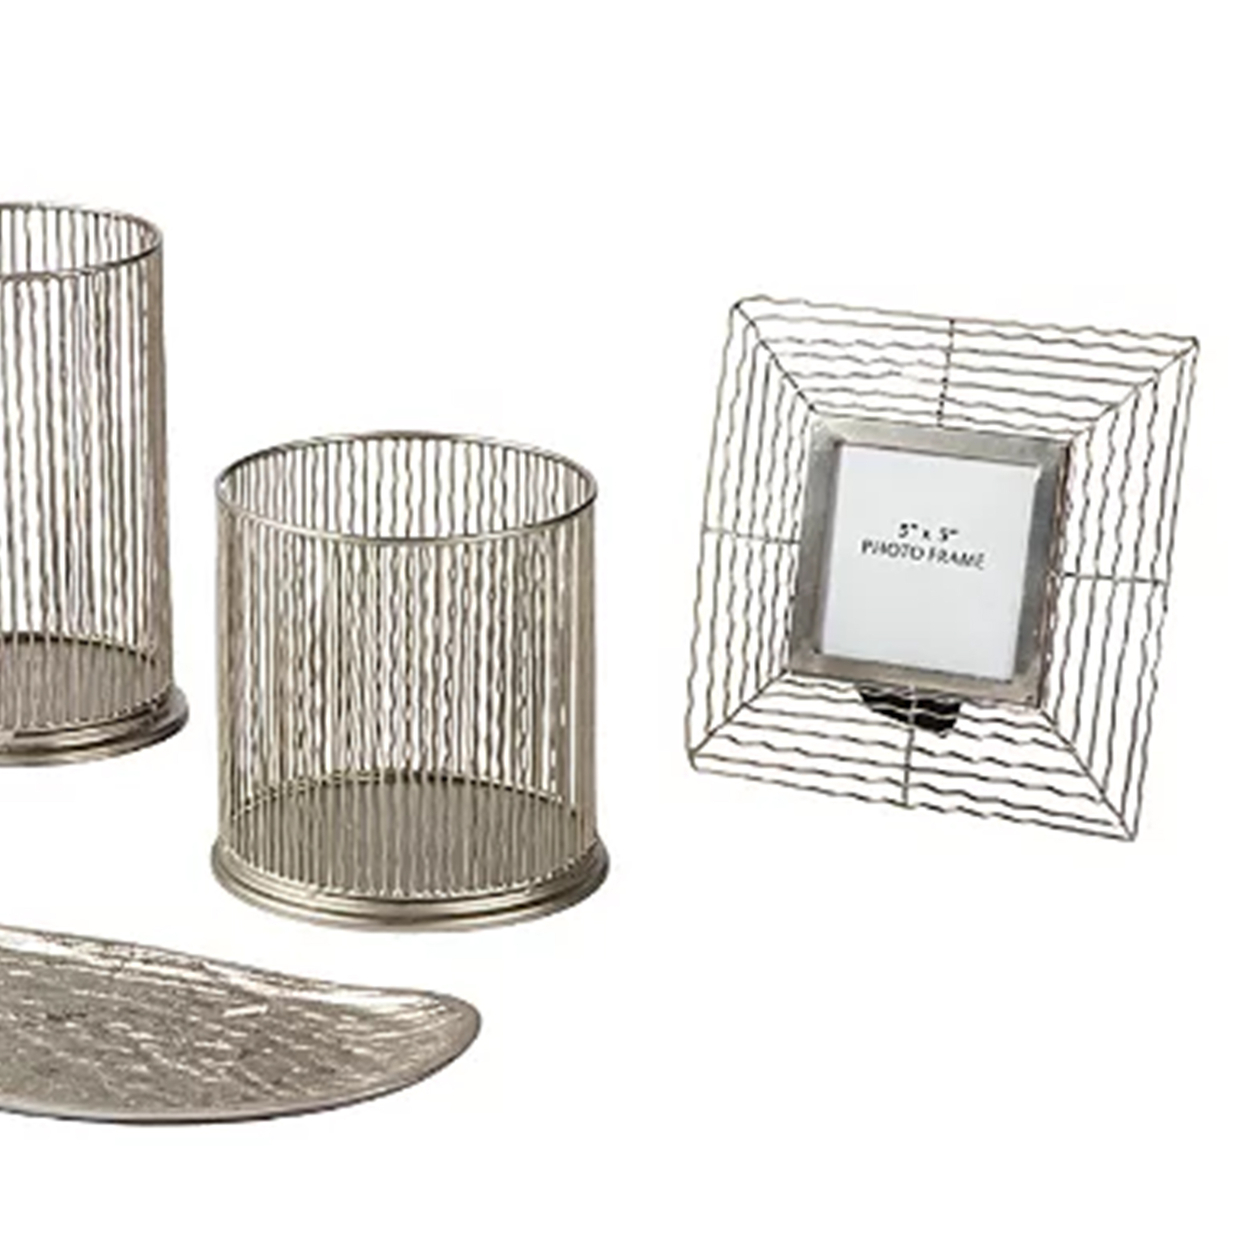 Industrial Style 5 Piece Metal Accessory Set With Grid Details, Silver- Saltoro Sherpi